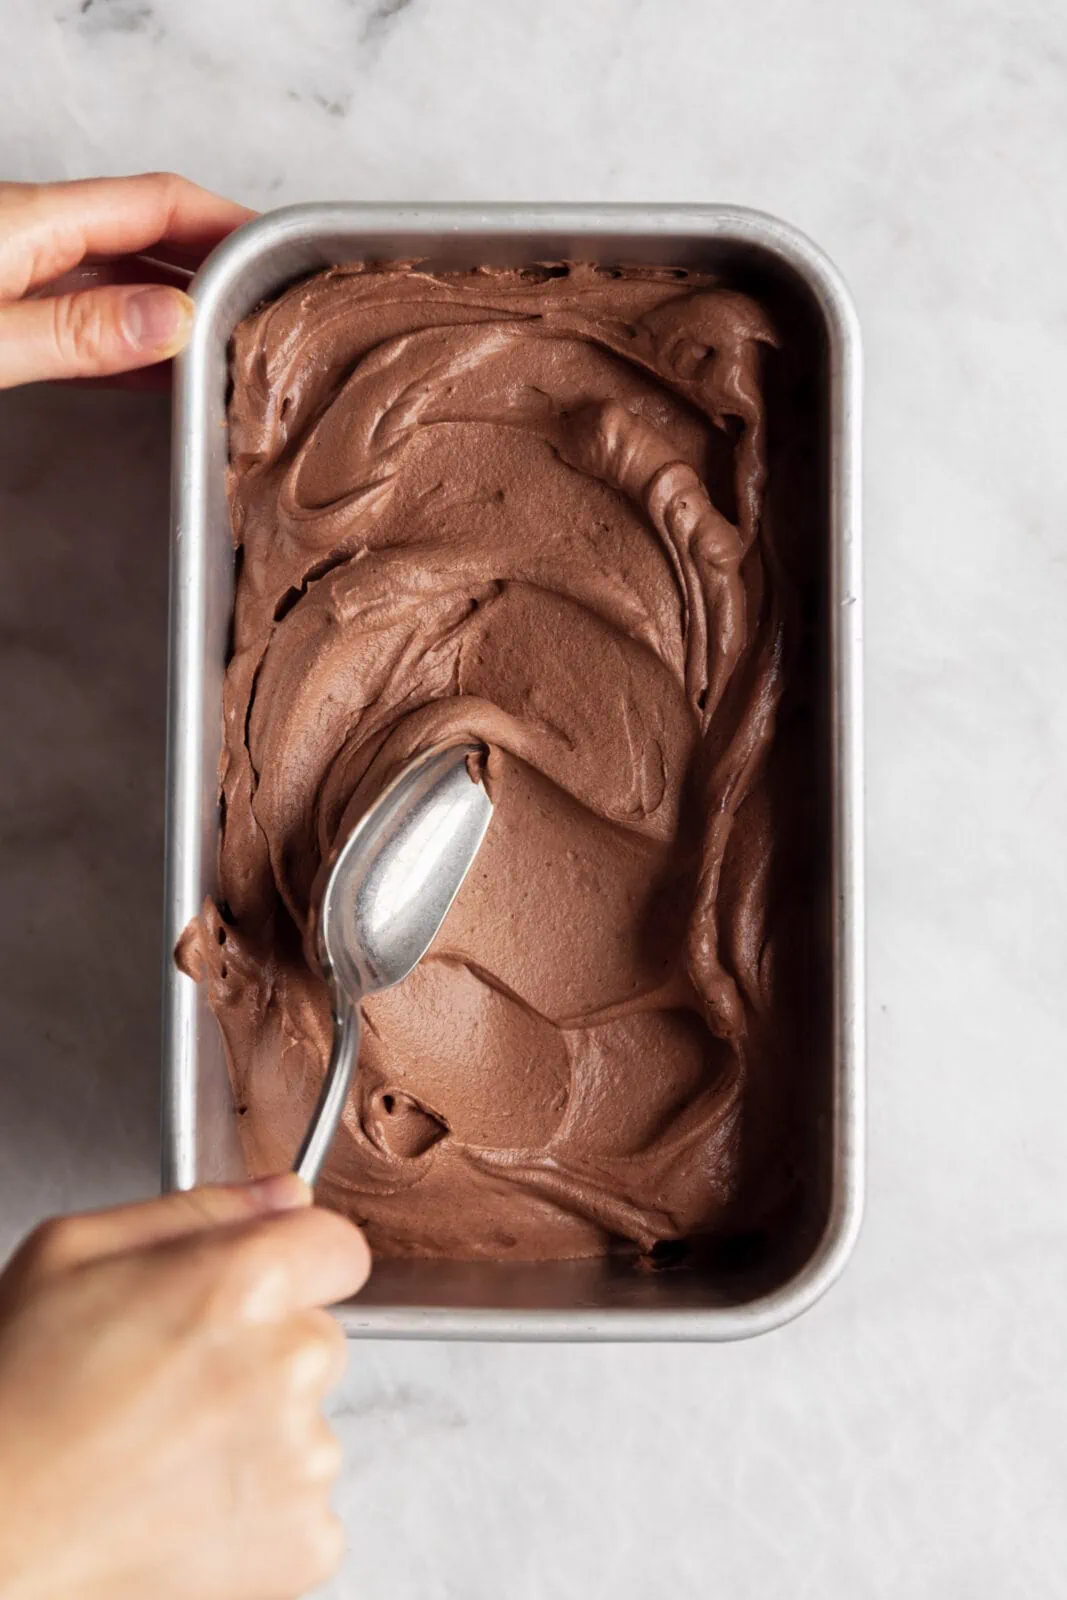 no churn chocolate ice cream in a loaf pan